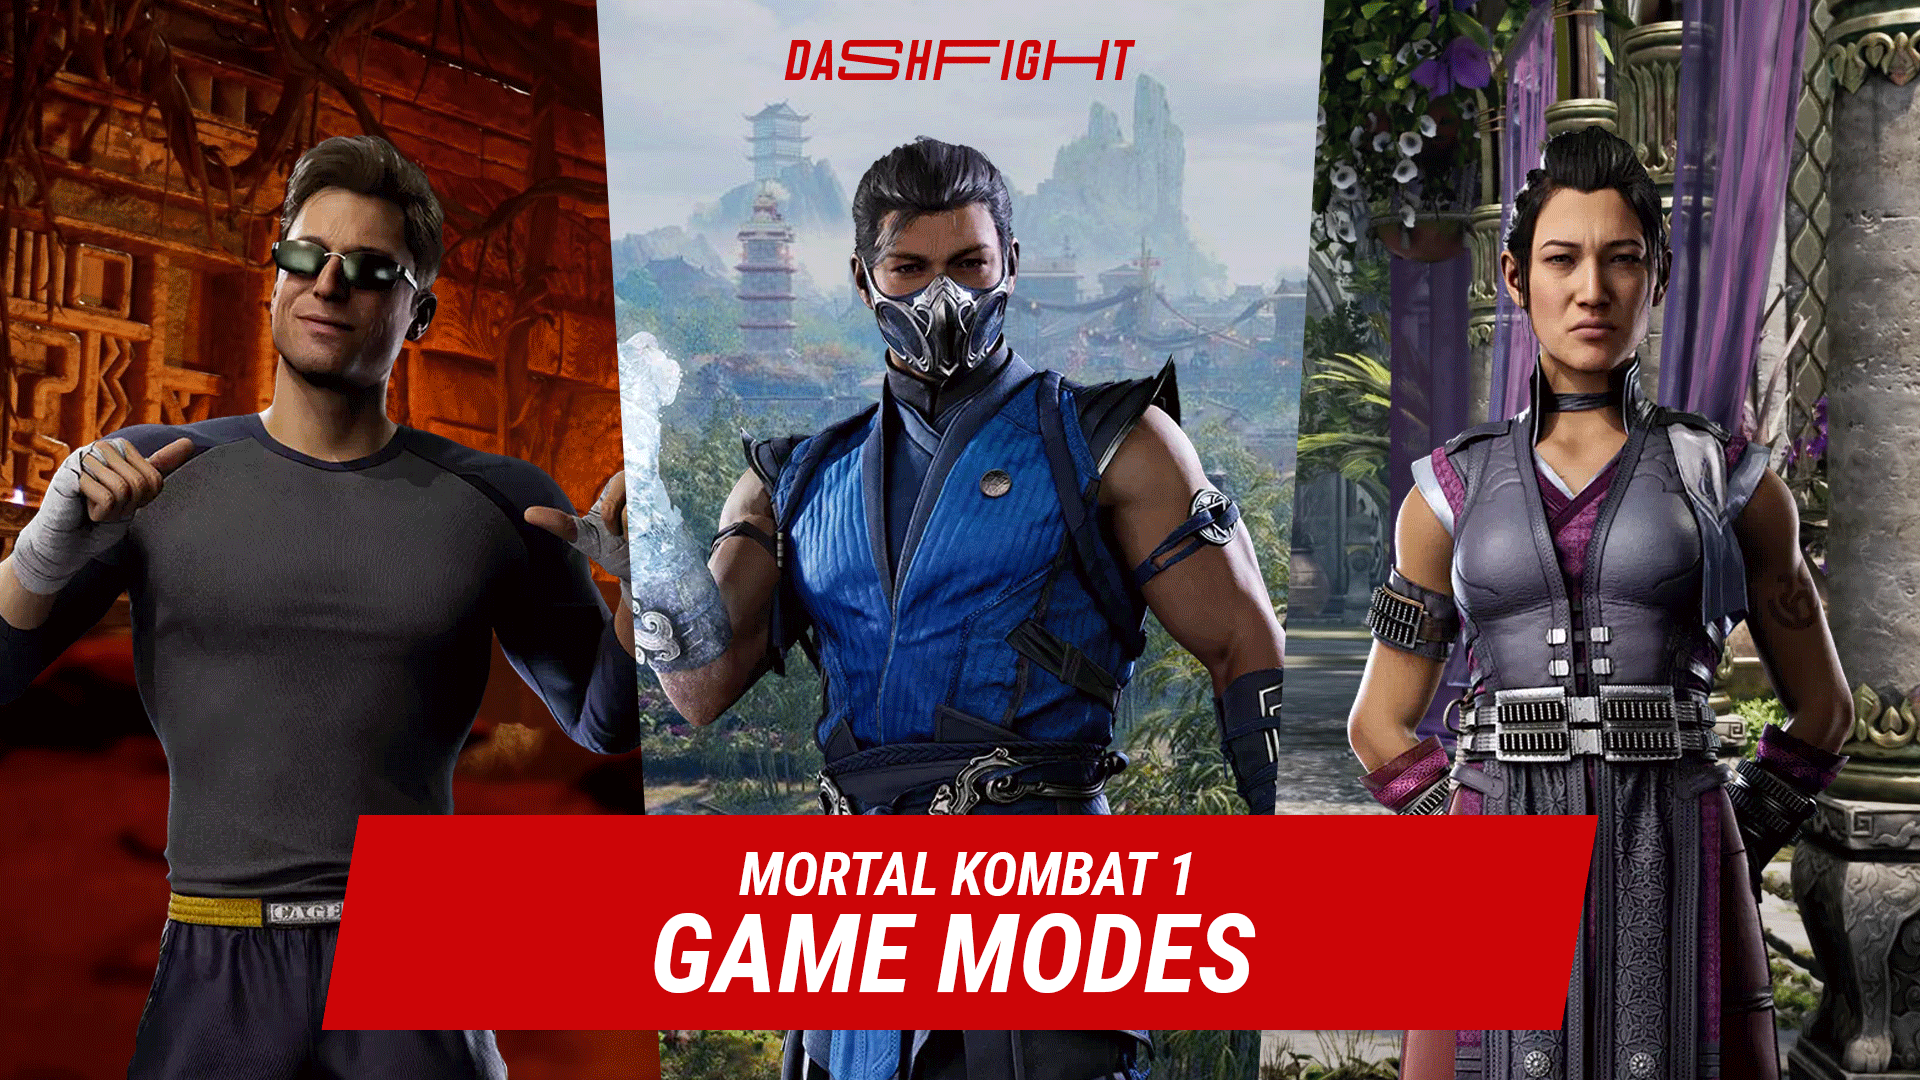 Every Mode in Mortal Kombat 1 Explained